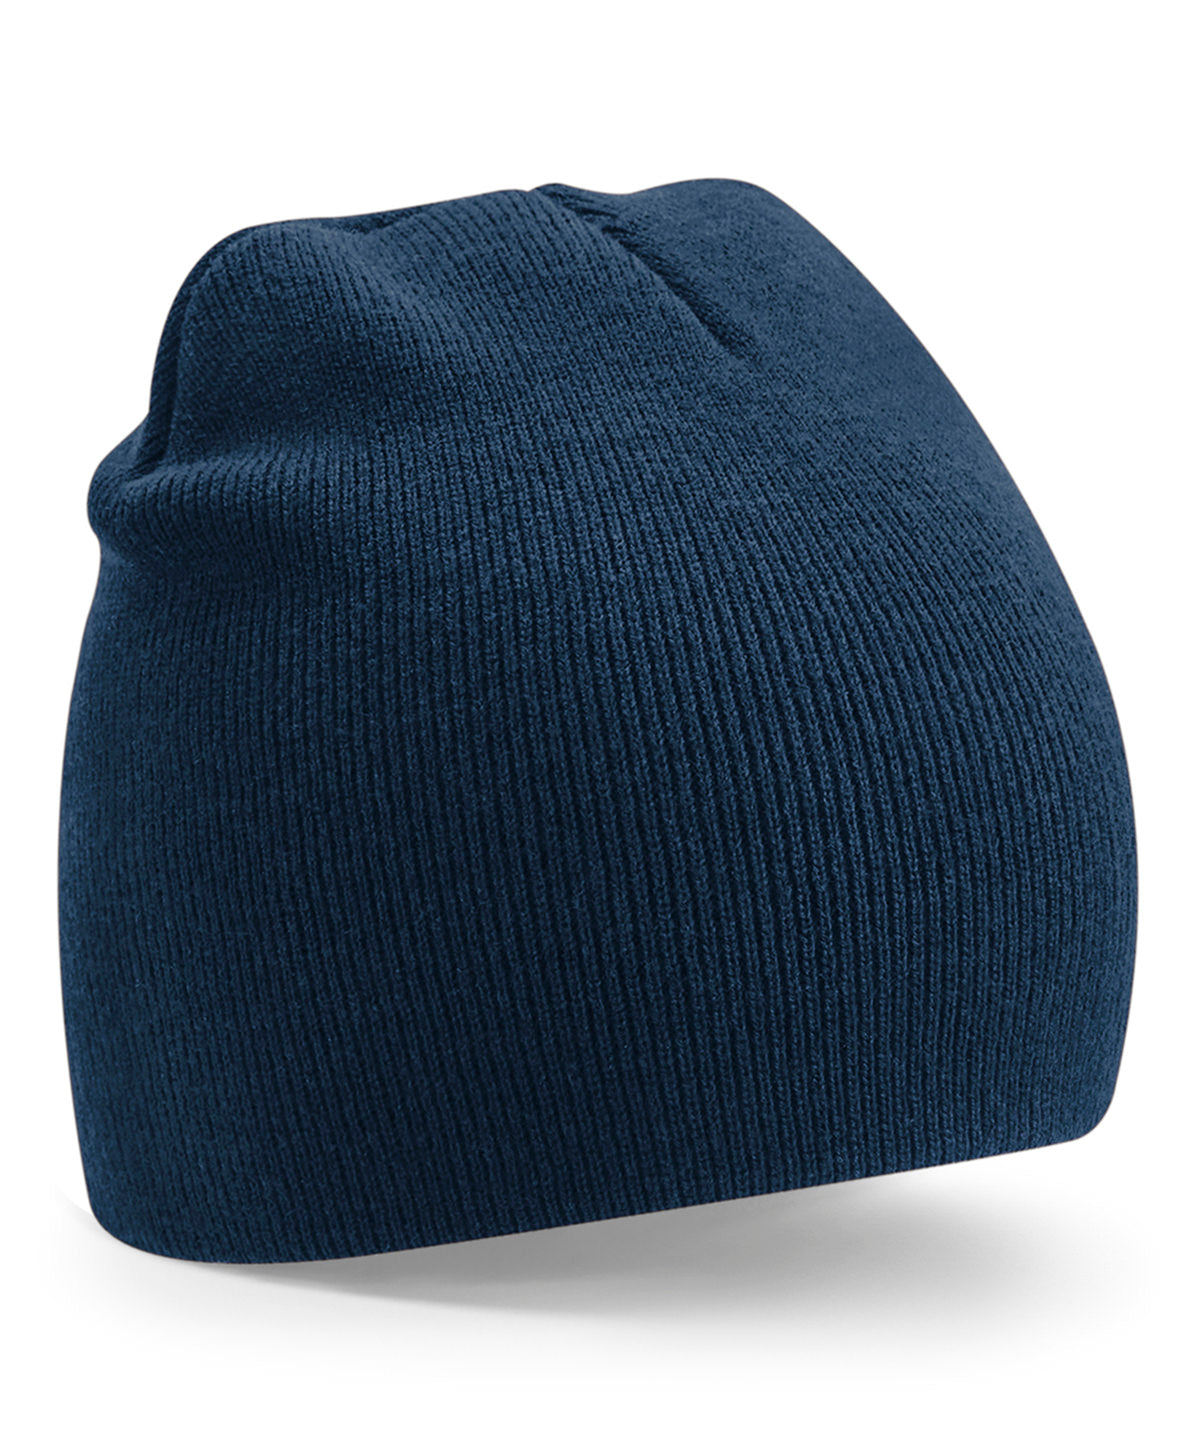 Personalised Hats - Navy Beechfield Recycled original pull-on beanie